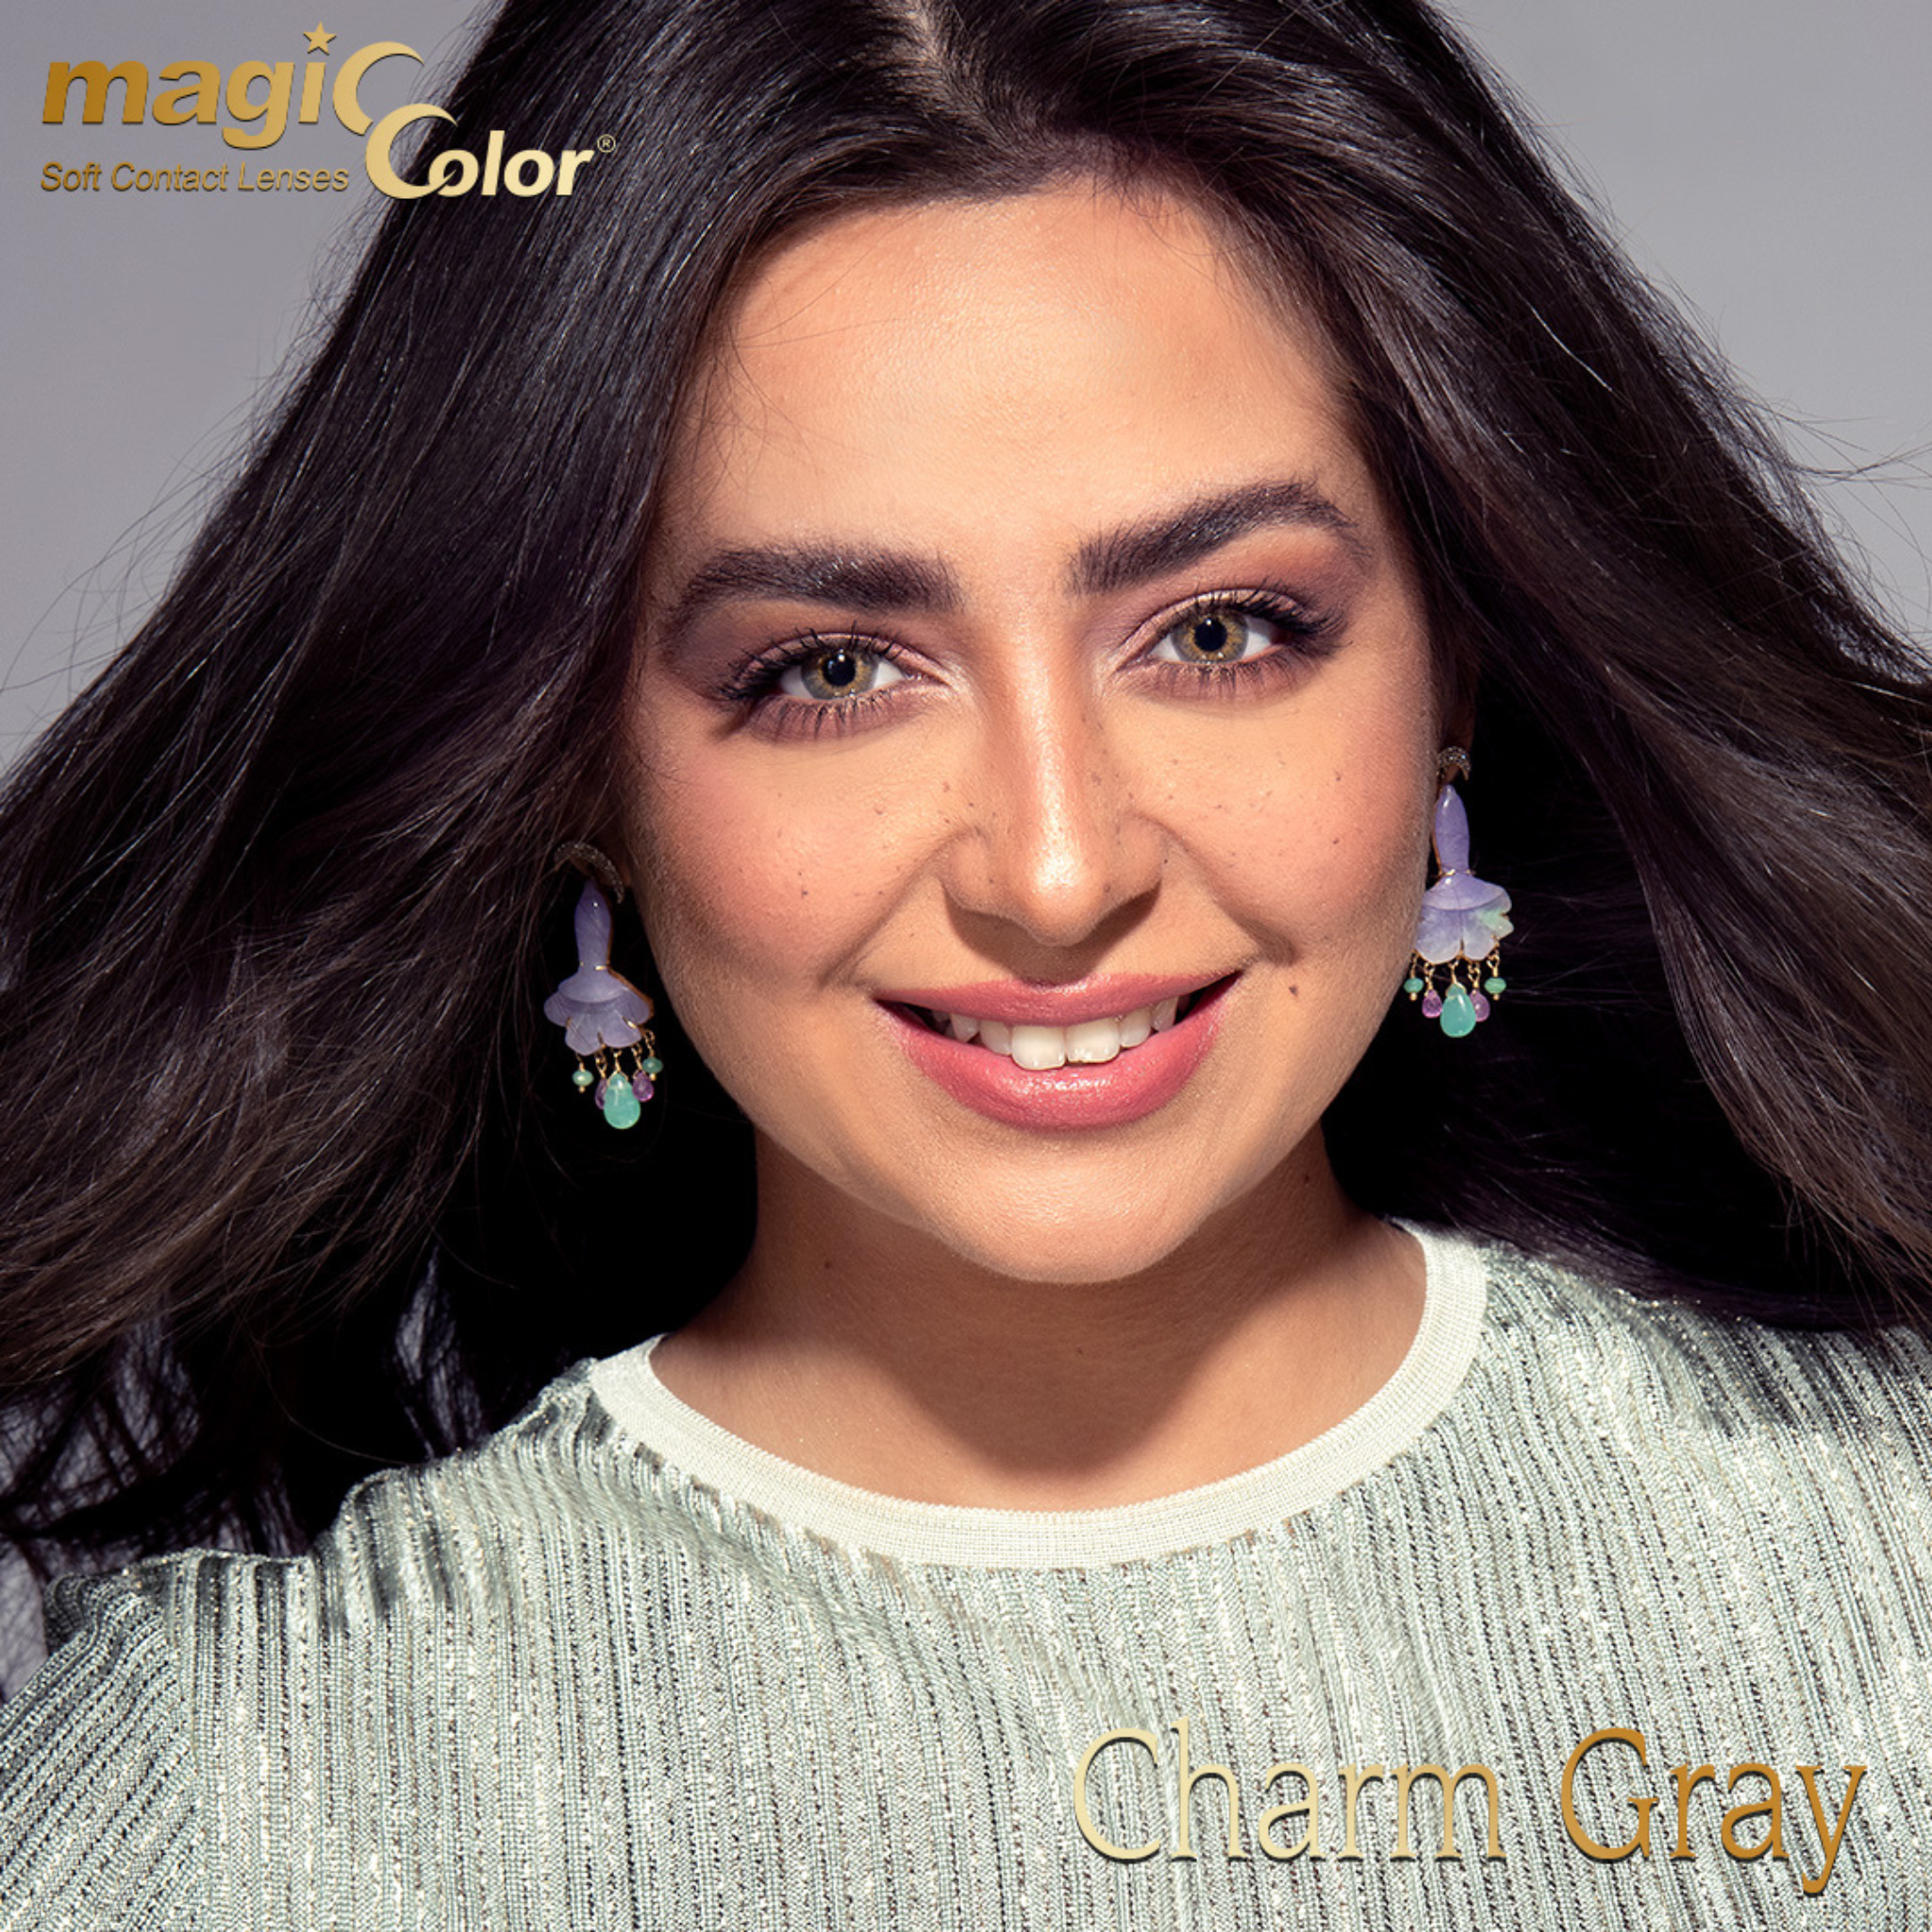 Magic Color: Charm gray - Monthly